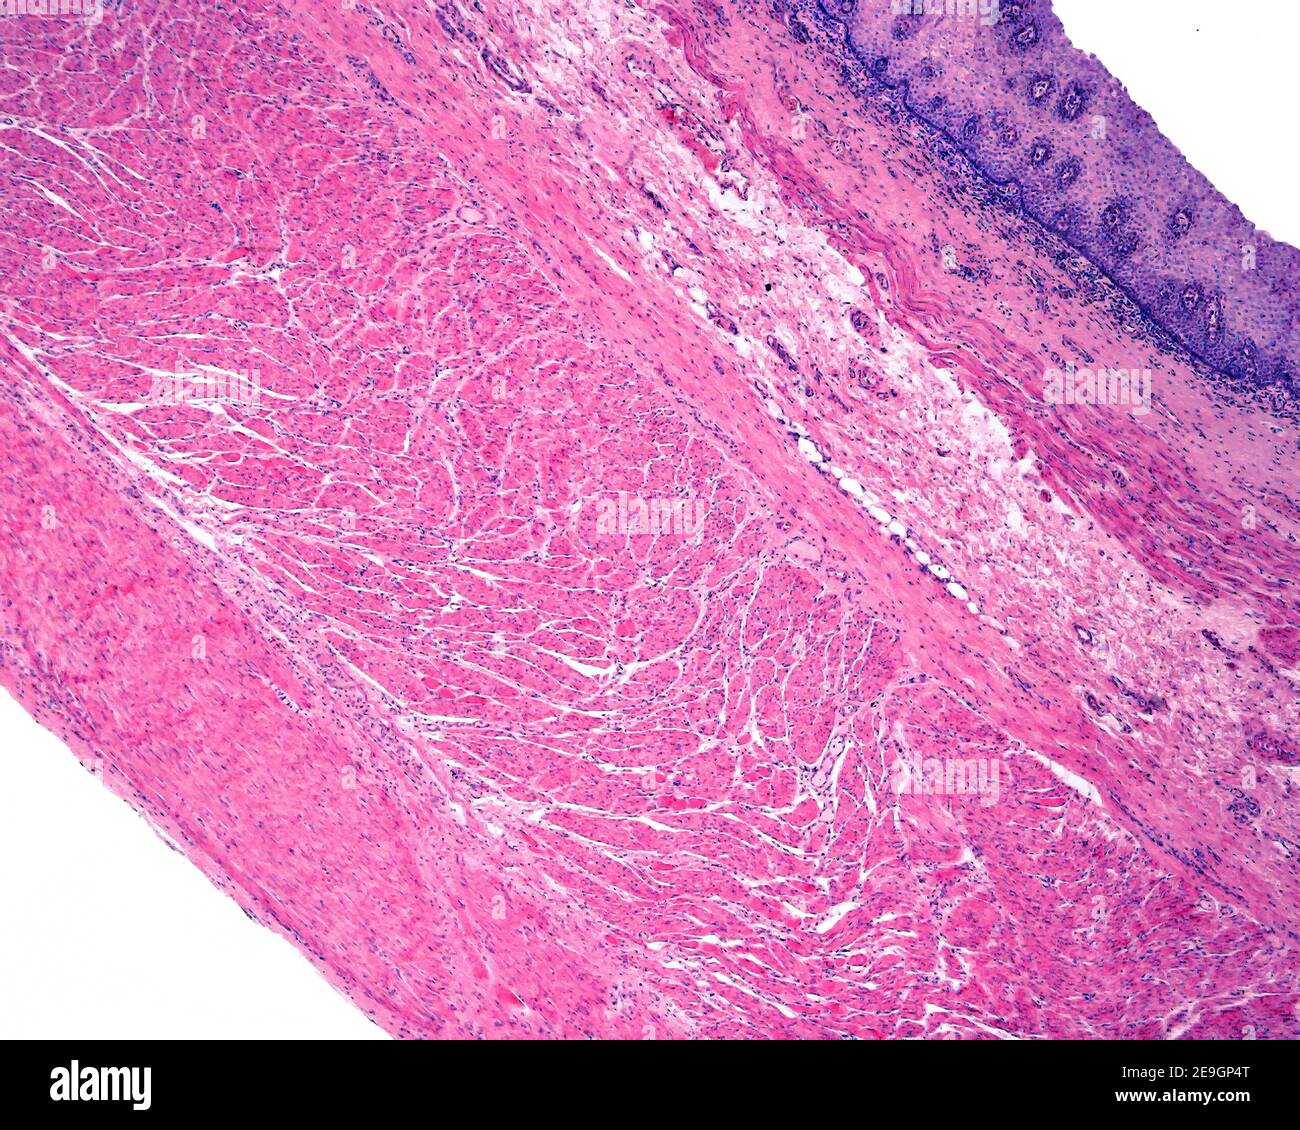 Layers of the wall of a human esophagus: mucosa (with epithelium, lamina propria, and muscularis mucosae), submucosa, muscular (inner and outer layers Stock Photo